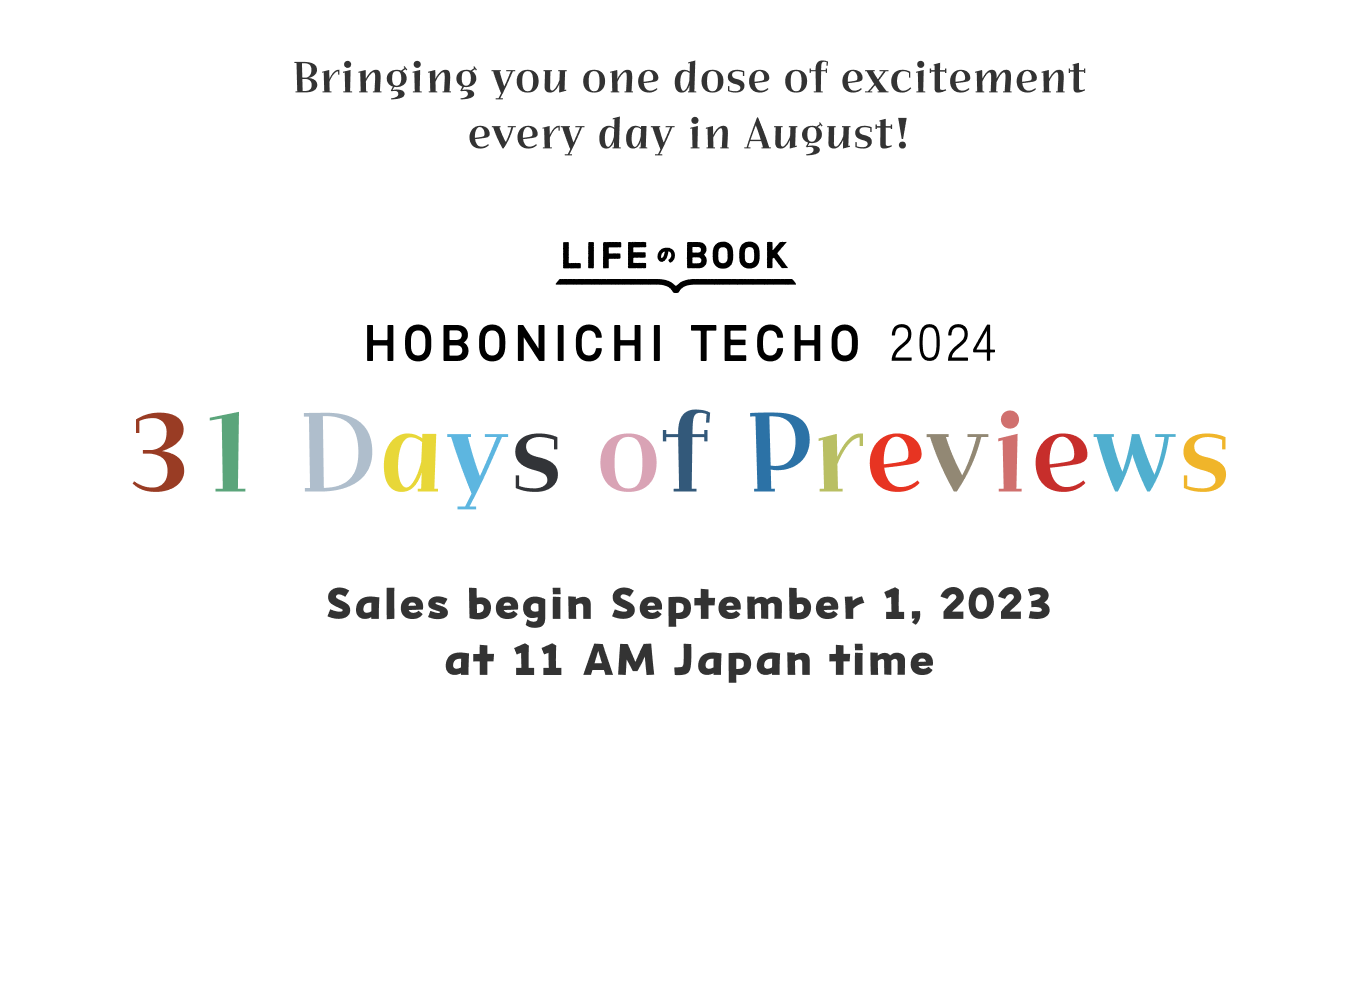 Bringing you one dose of excitement every day in August!
              Life Book
              Hobonichi Techo 2024
              31 Days of Previews
              Sales begin September 1, 2023 at 11 AM Japan time